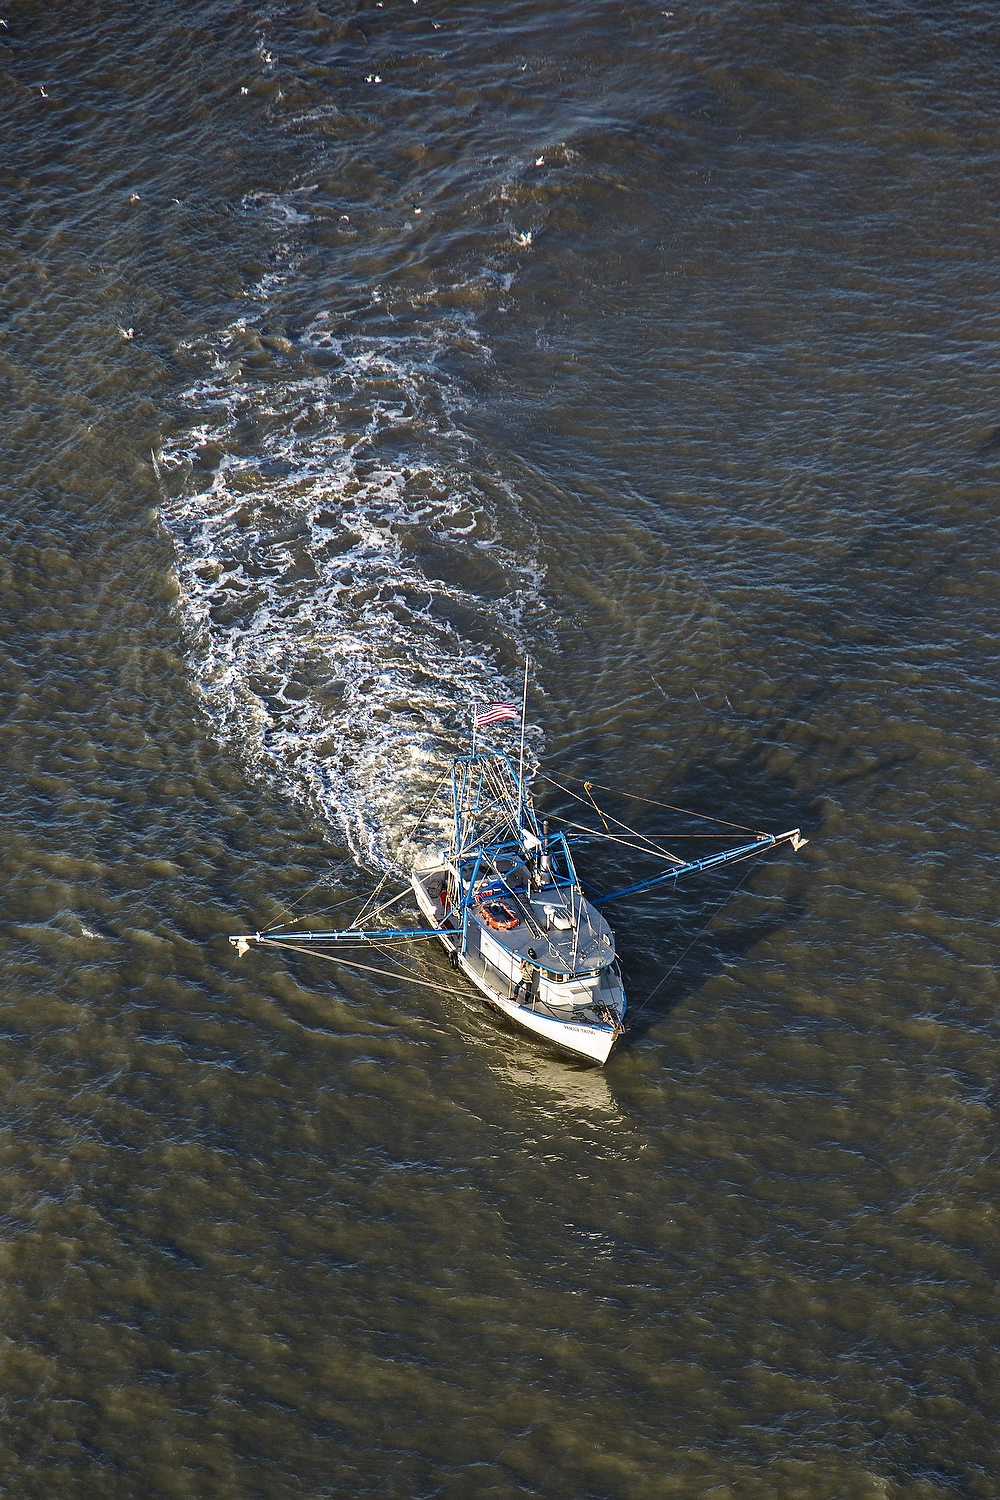  Aerial view of a shrimp boat fishing the waters off Charleston, South Carolina 